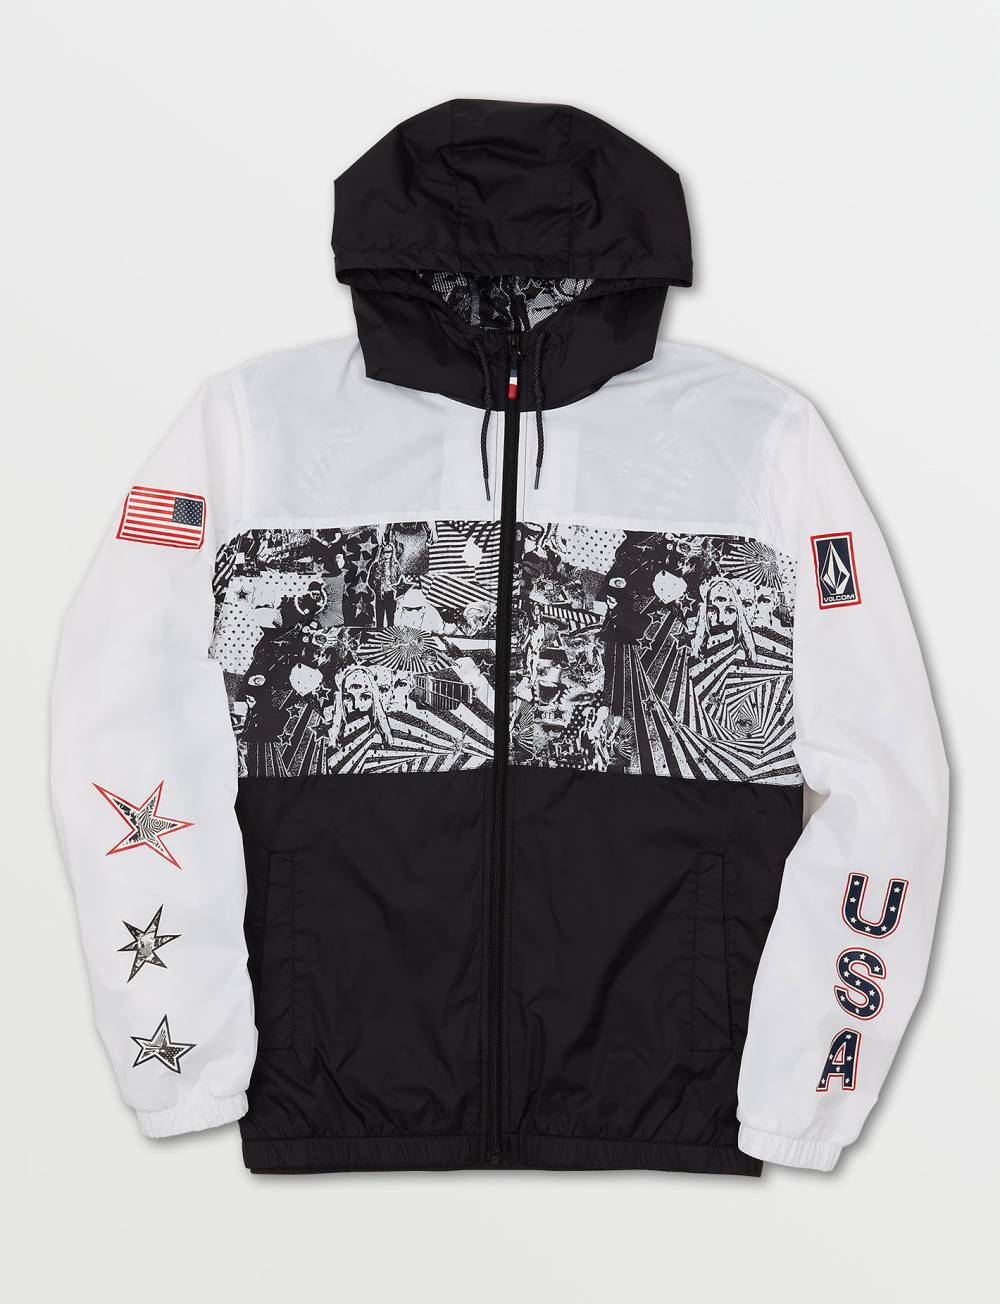 Team USAs Ralph Lauren Opening Ceremony Outfit Are Available for Purchase